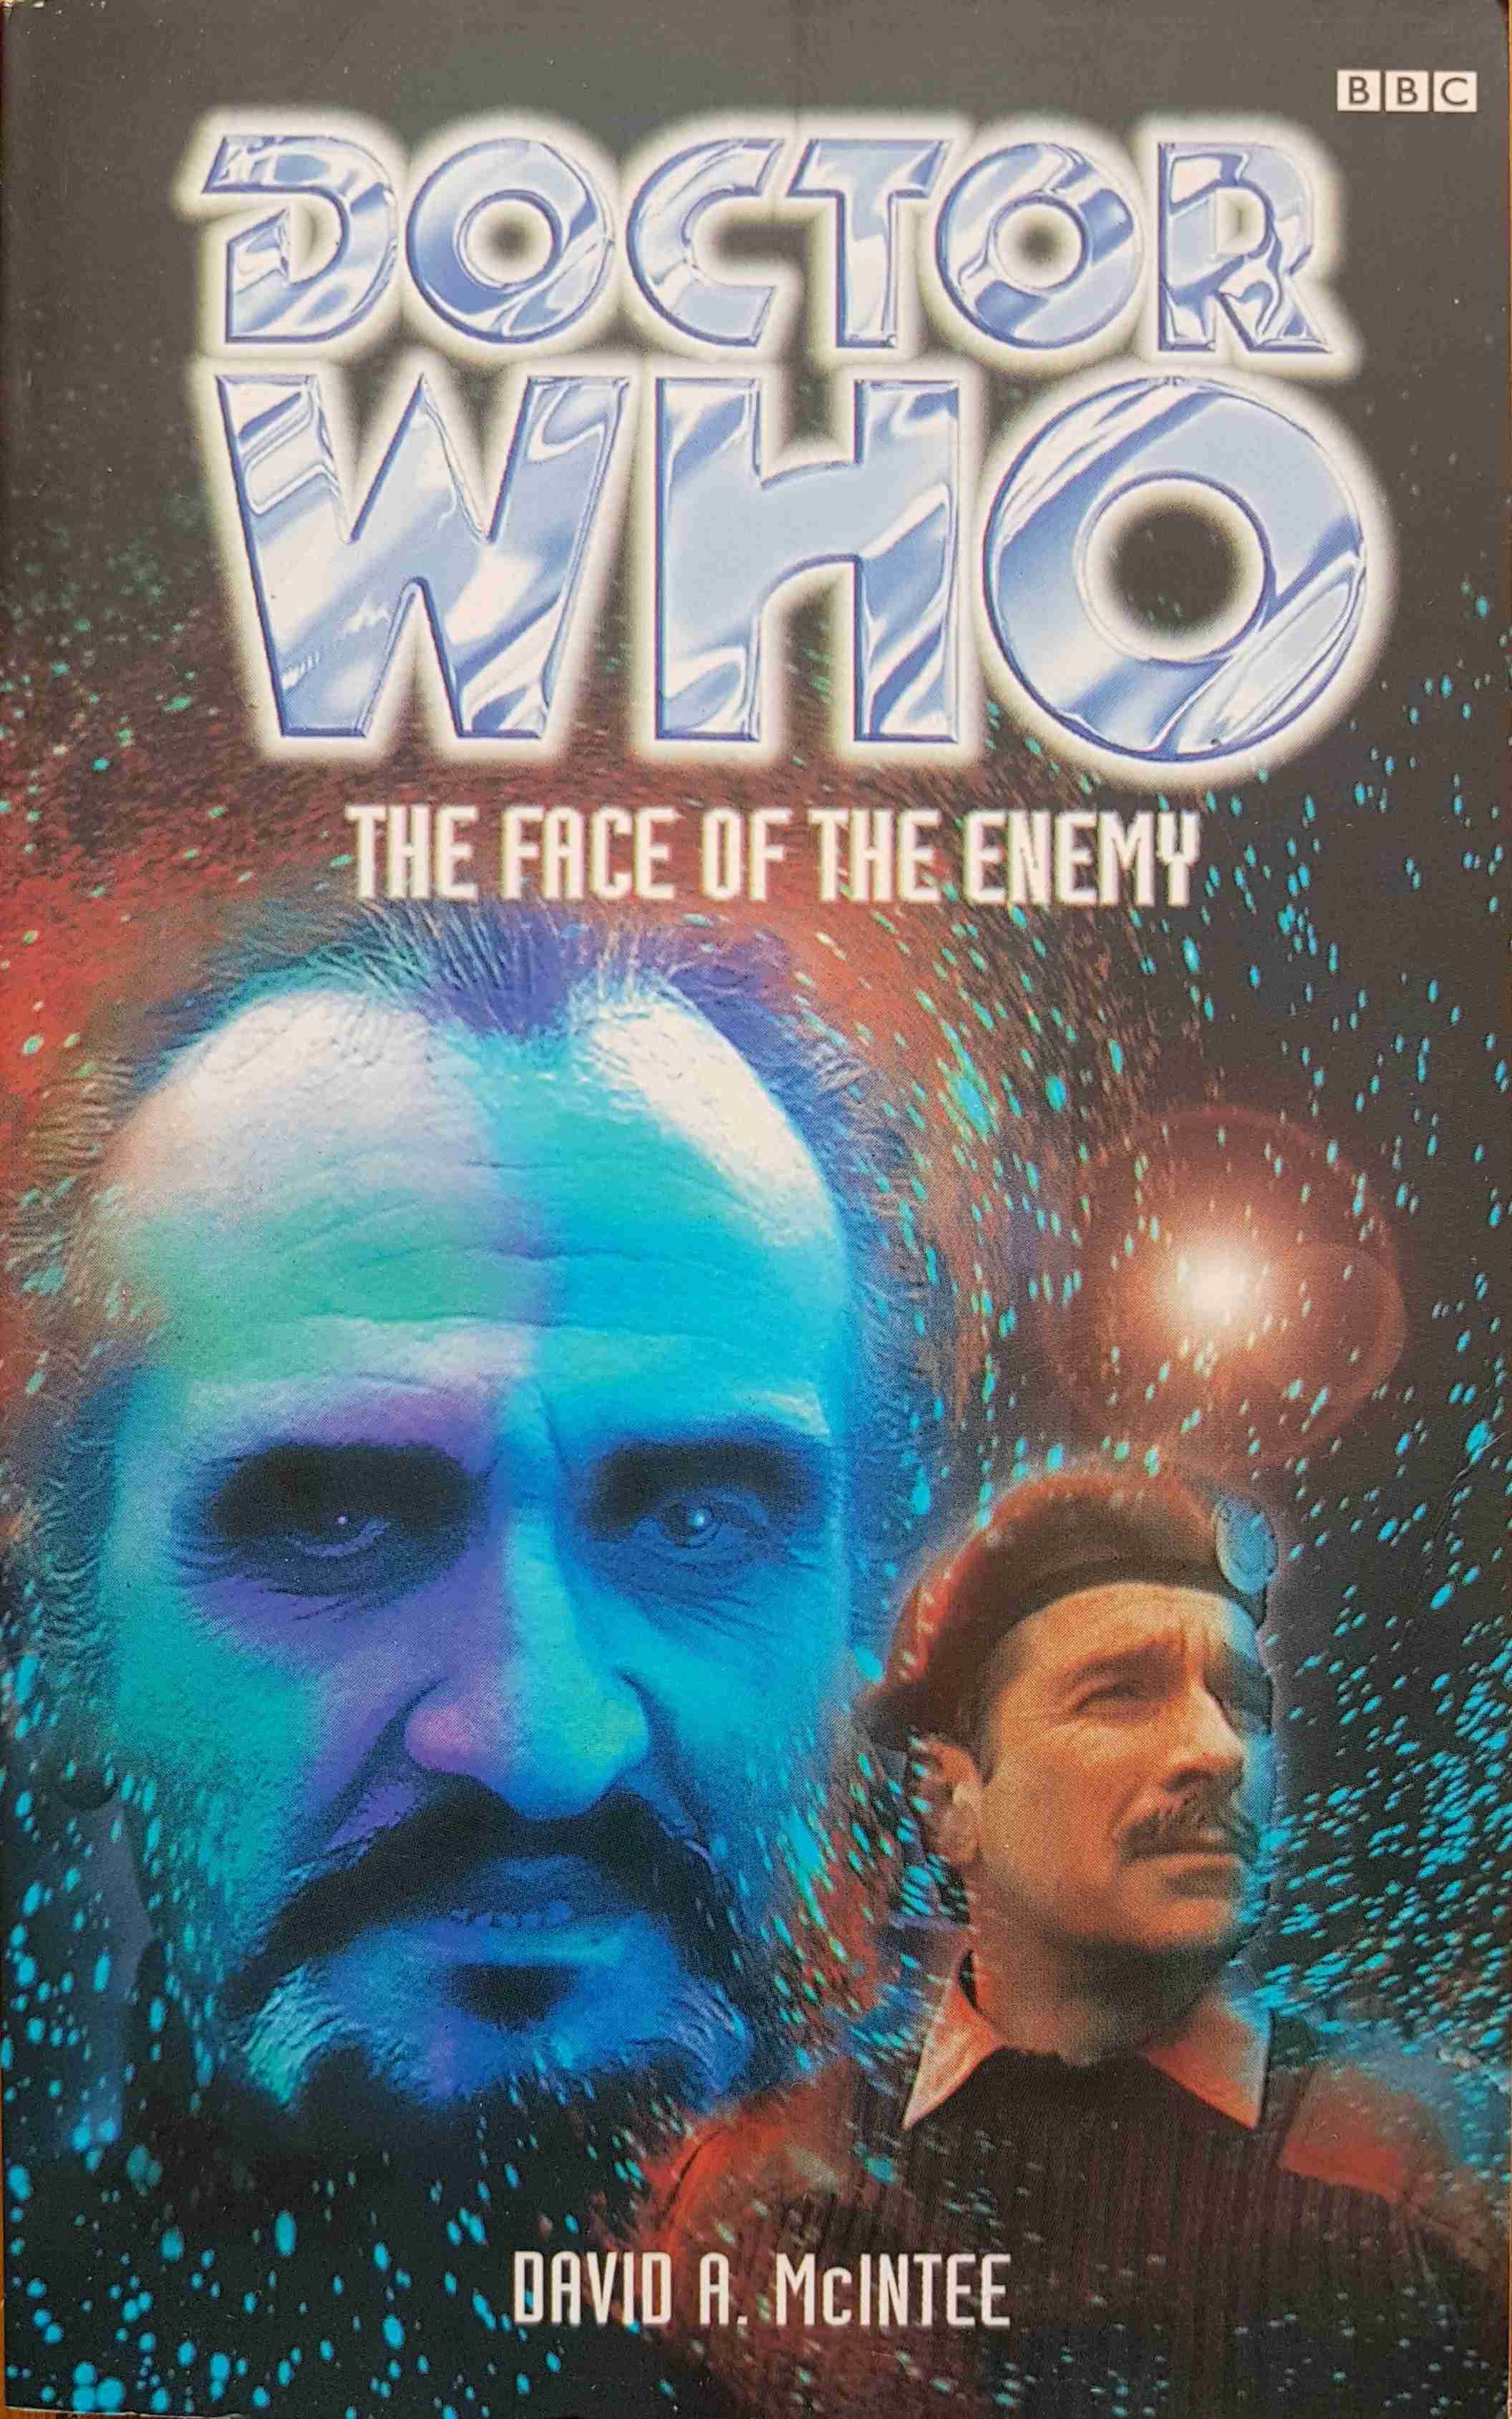 Picture of 0-563-40580-5 Doctor Who - The face of the enemy by artist David A. McIntee from the BBC books - Records and Tapes library